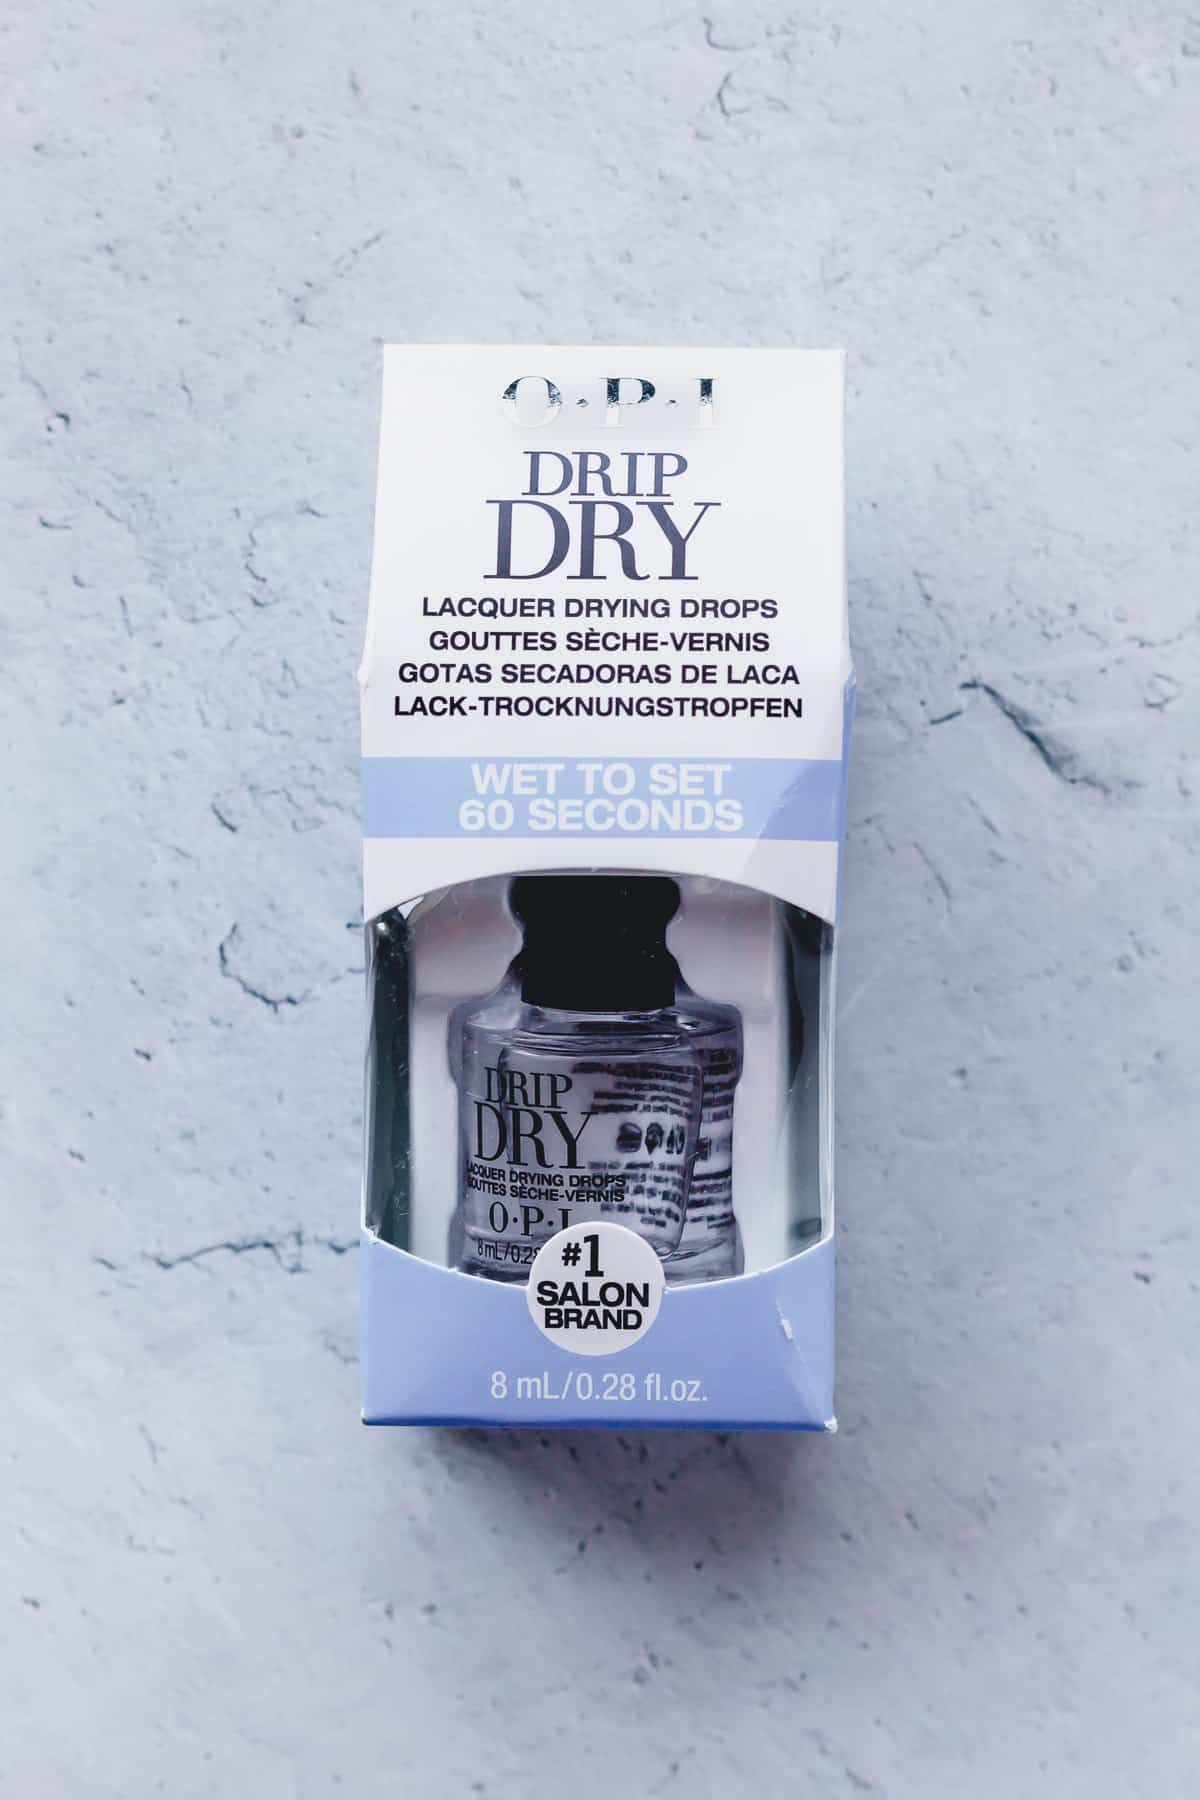 OPI Drip Dry in package on a gray background